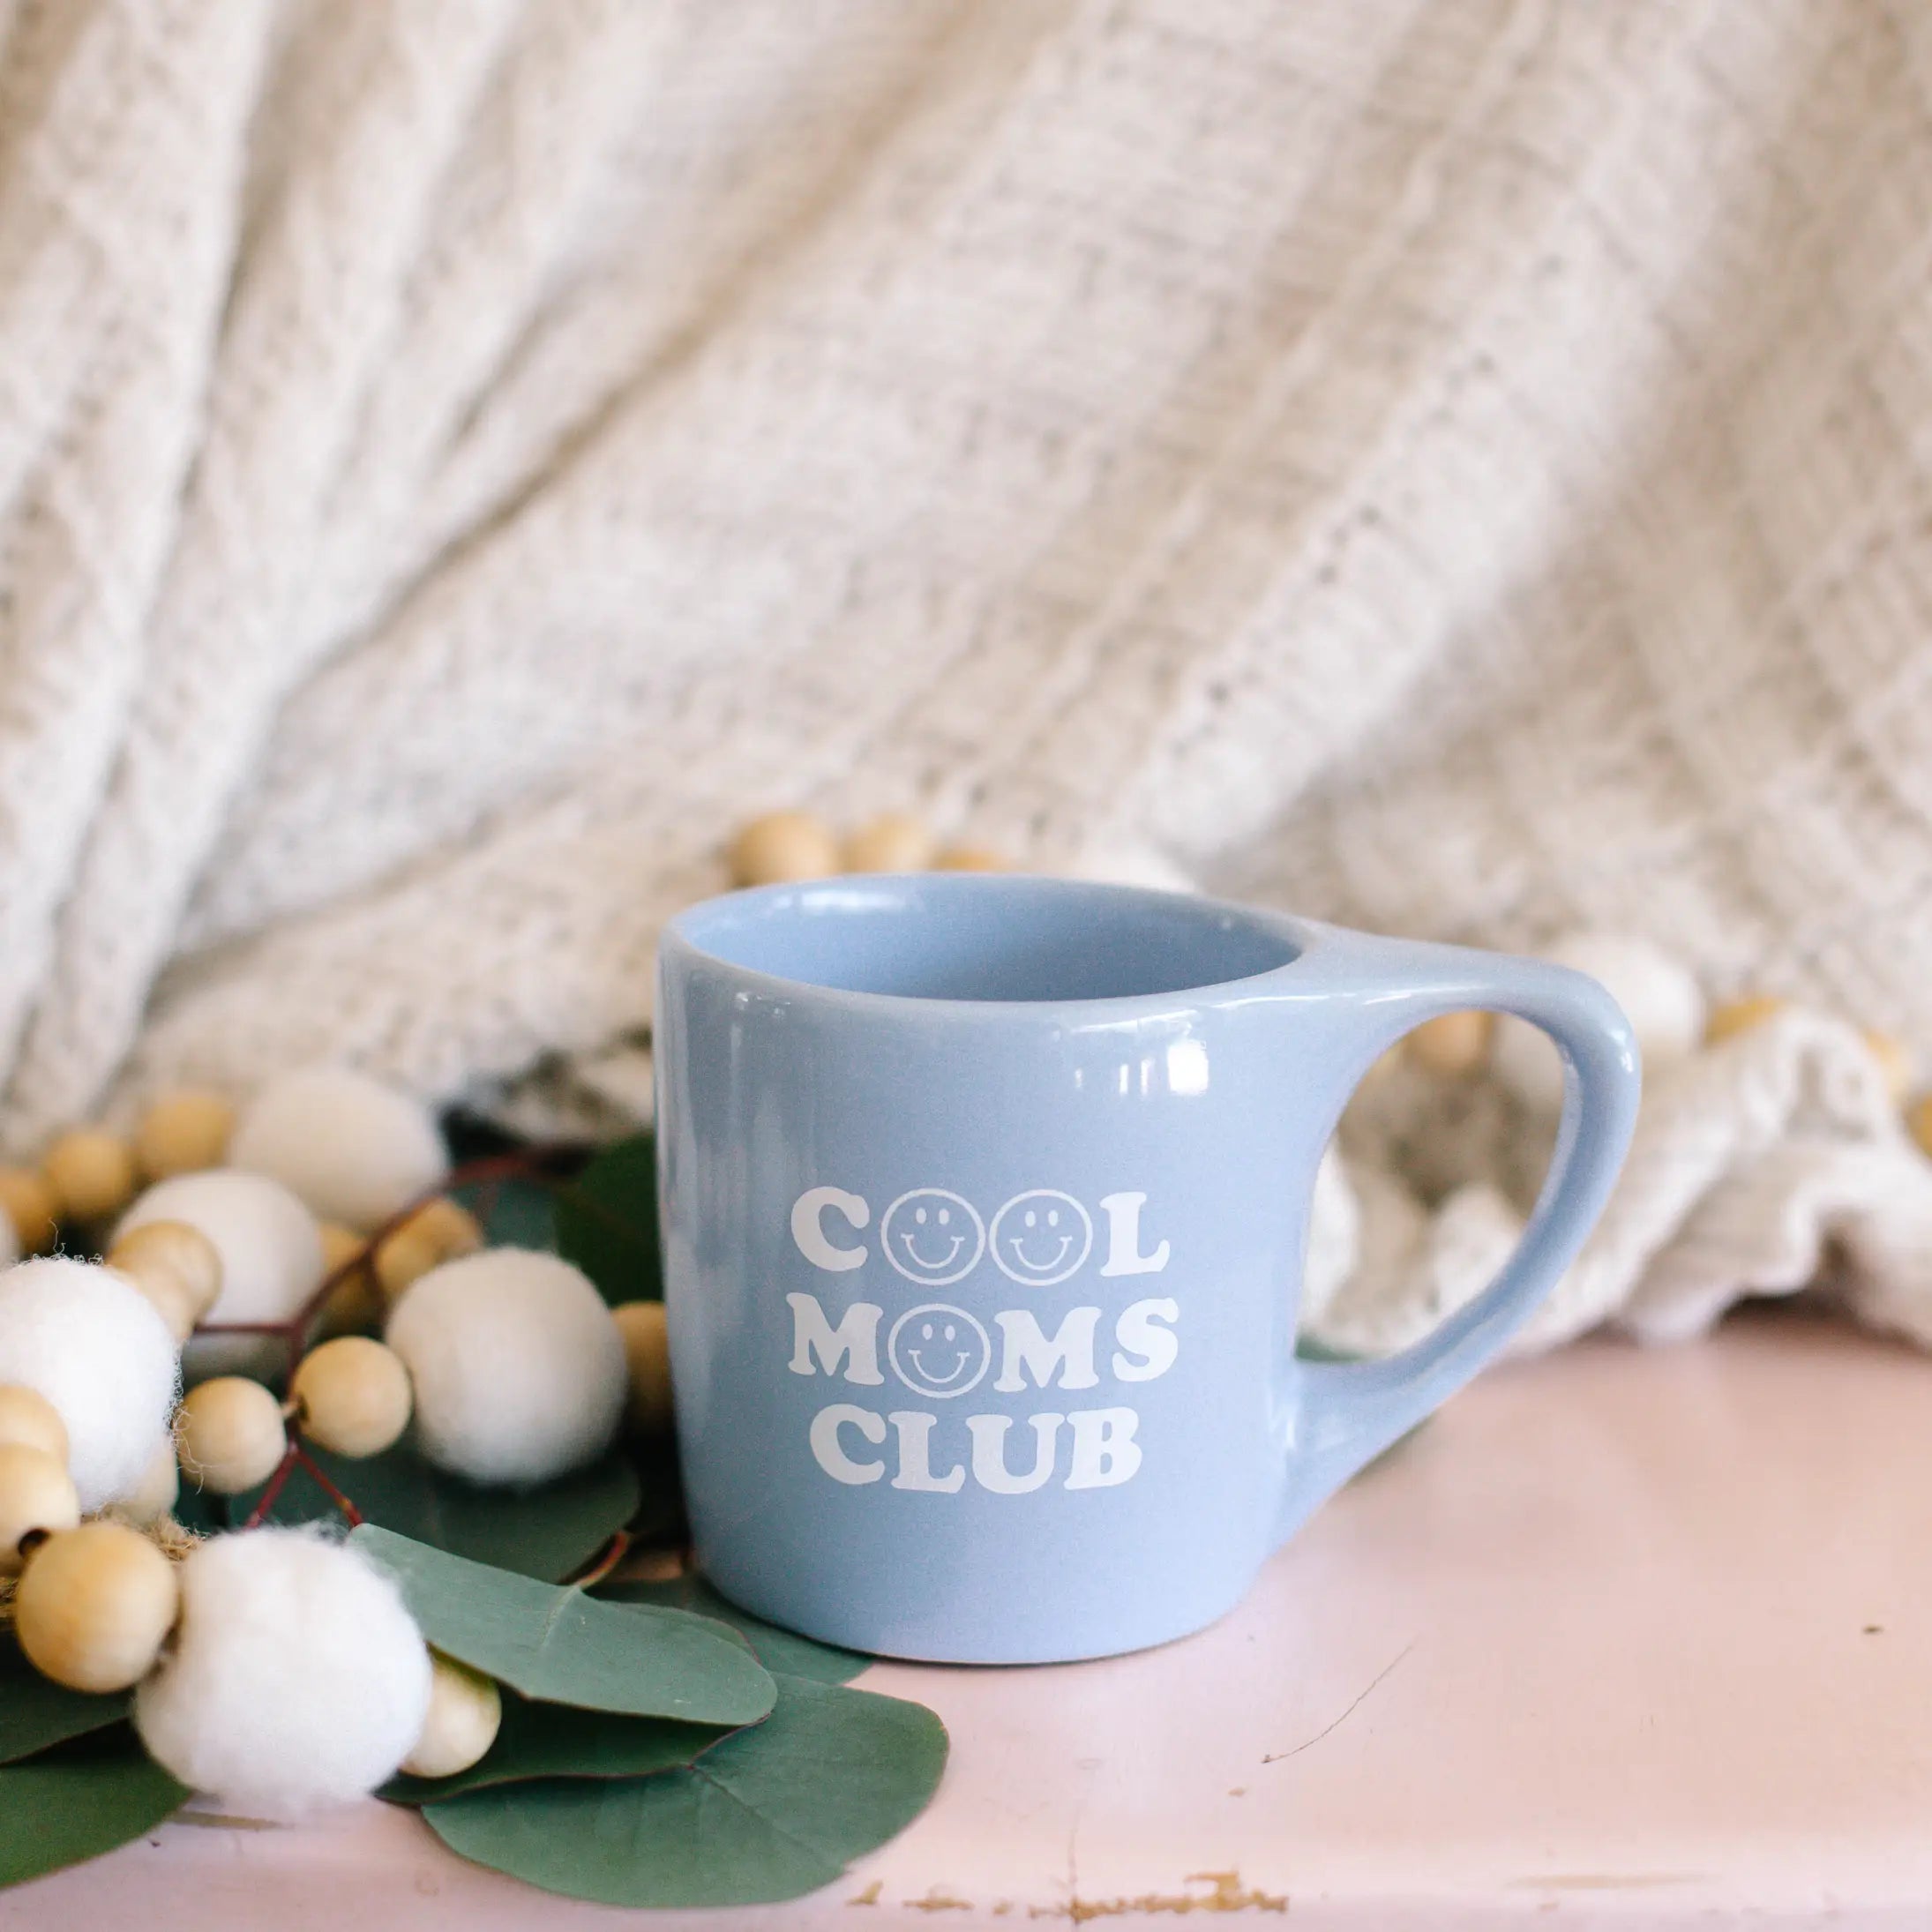 Cool Moms Club Ceramic Mug in Pastel Blue with Smiley Face from Rachel Allene with eucalyptus background